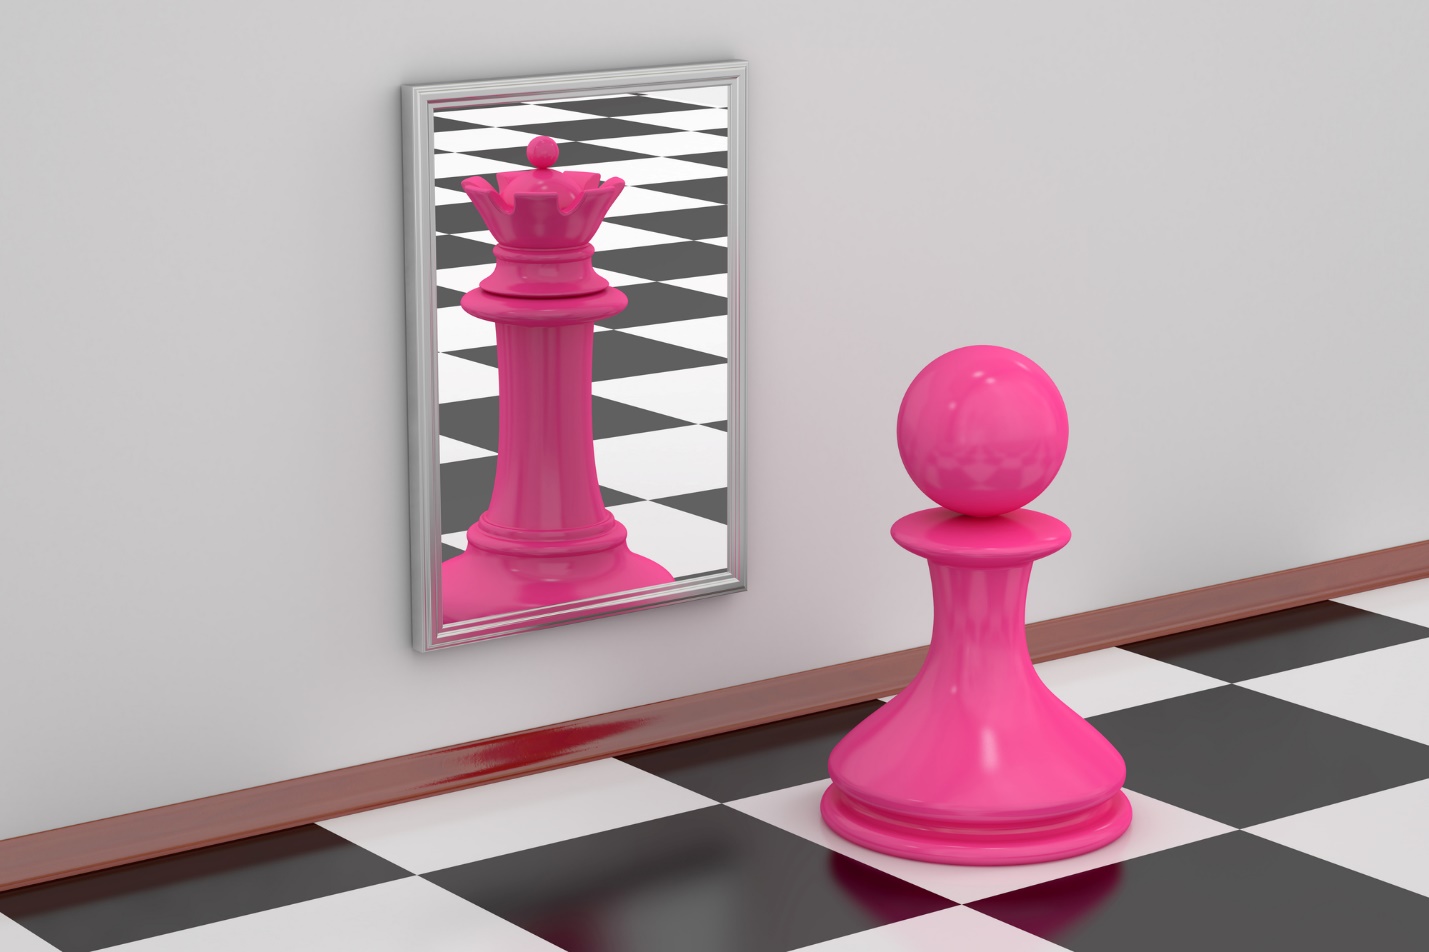 A pink chess piece on a black and white checkered floor

Description automatically generated